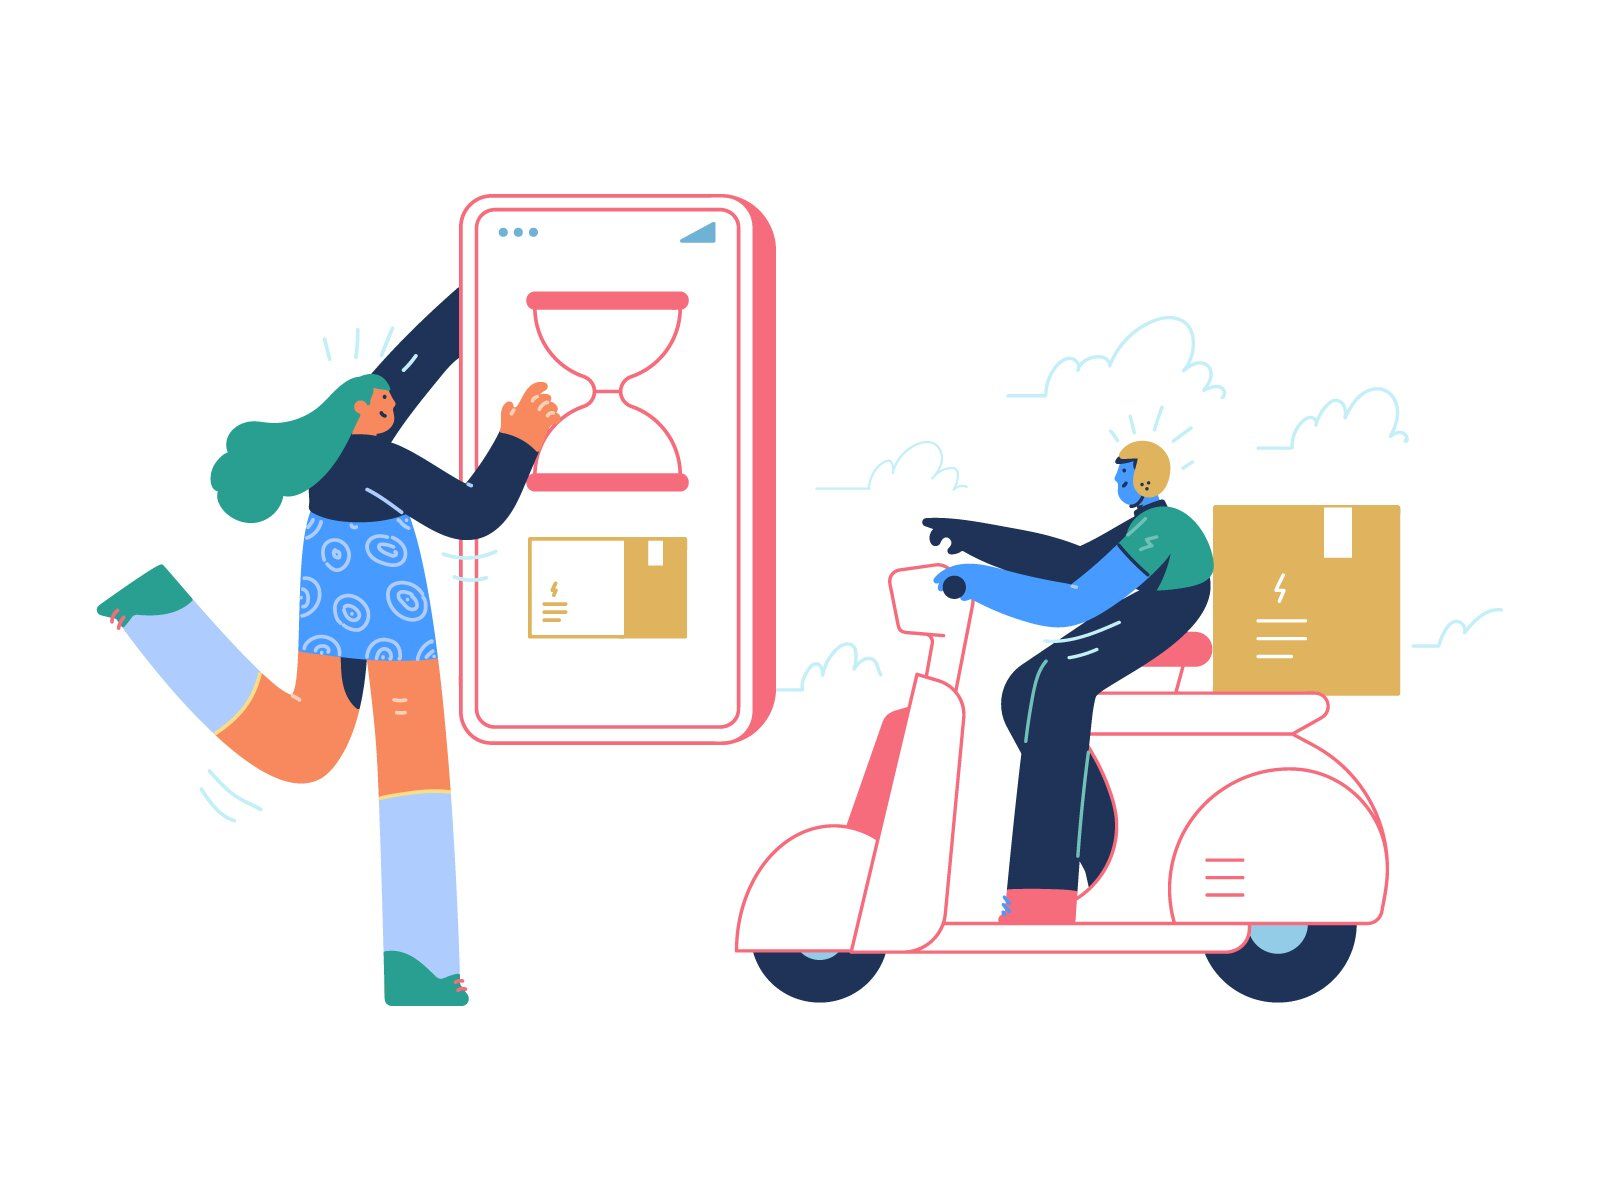 Food delivery applications for couriers should also have an order screen where couriers access all information about the orders (*image by [Ramy Wafaa](https://dribbble.com/roundicons){ rel="nofollow" target="_blank" .default-md}*)